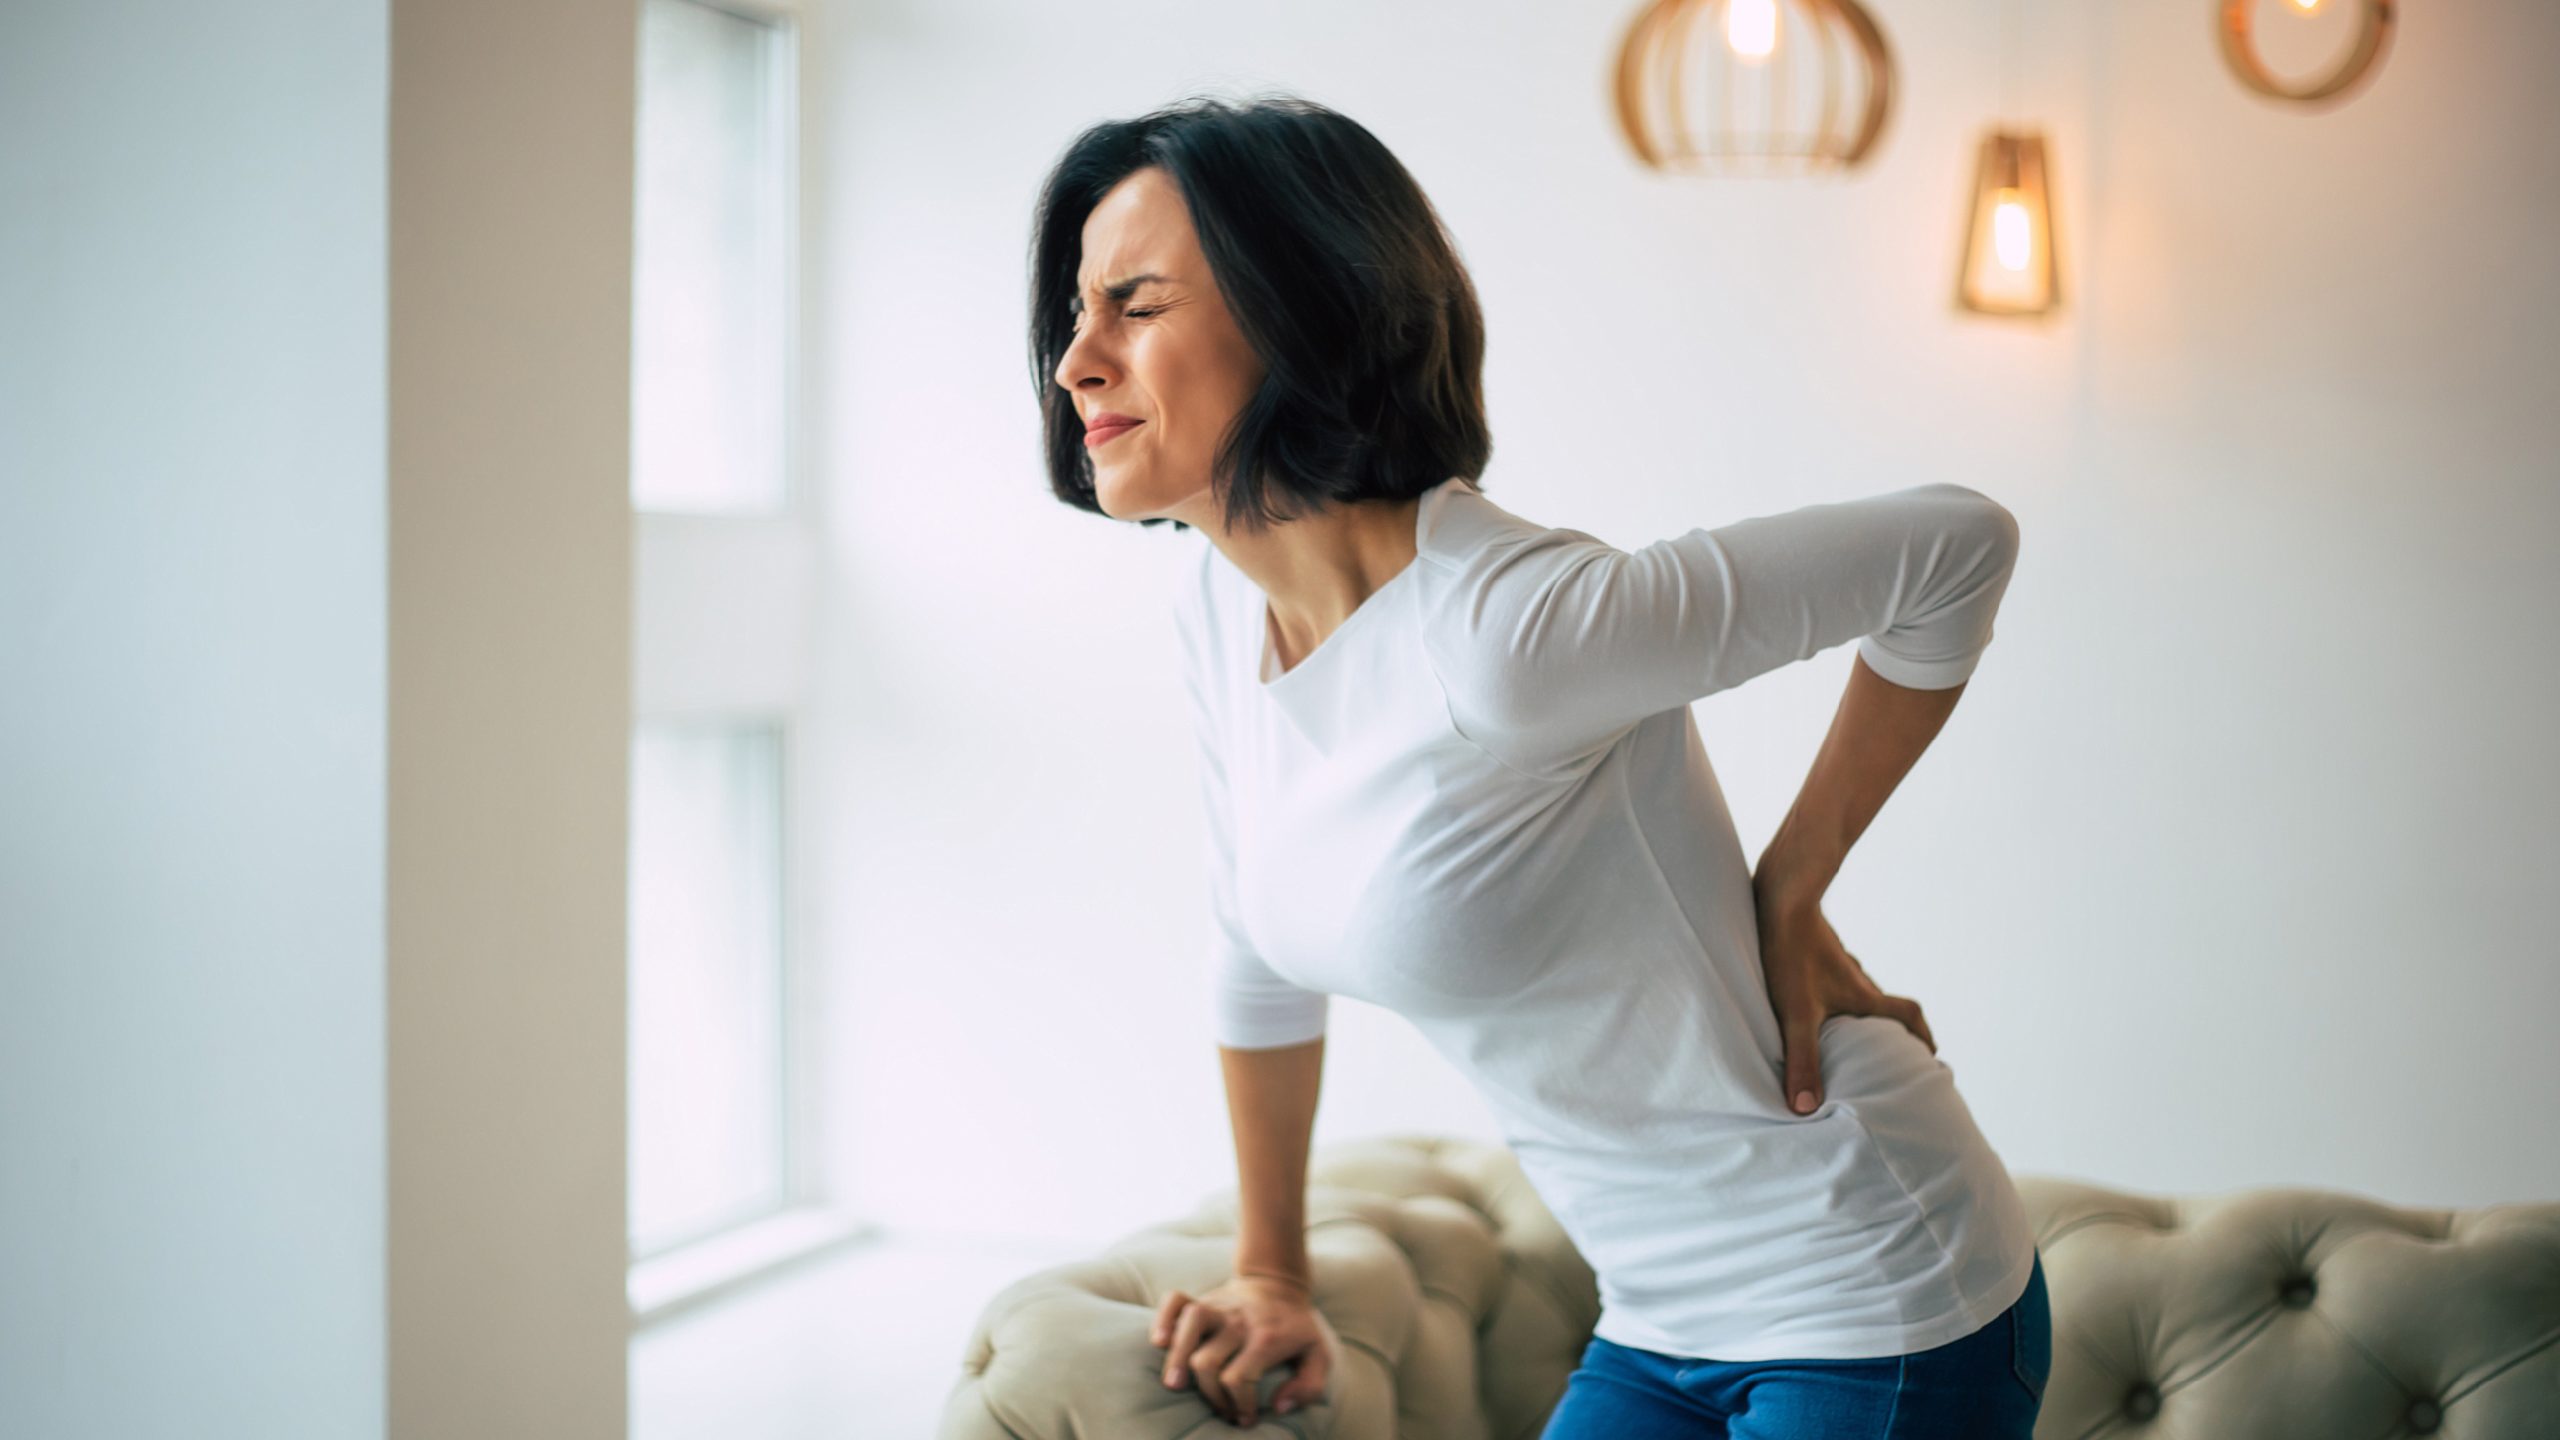 How Do You Stand Up With a Herniated Disc?